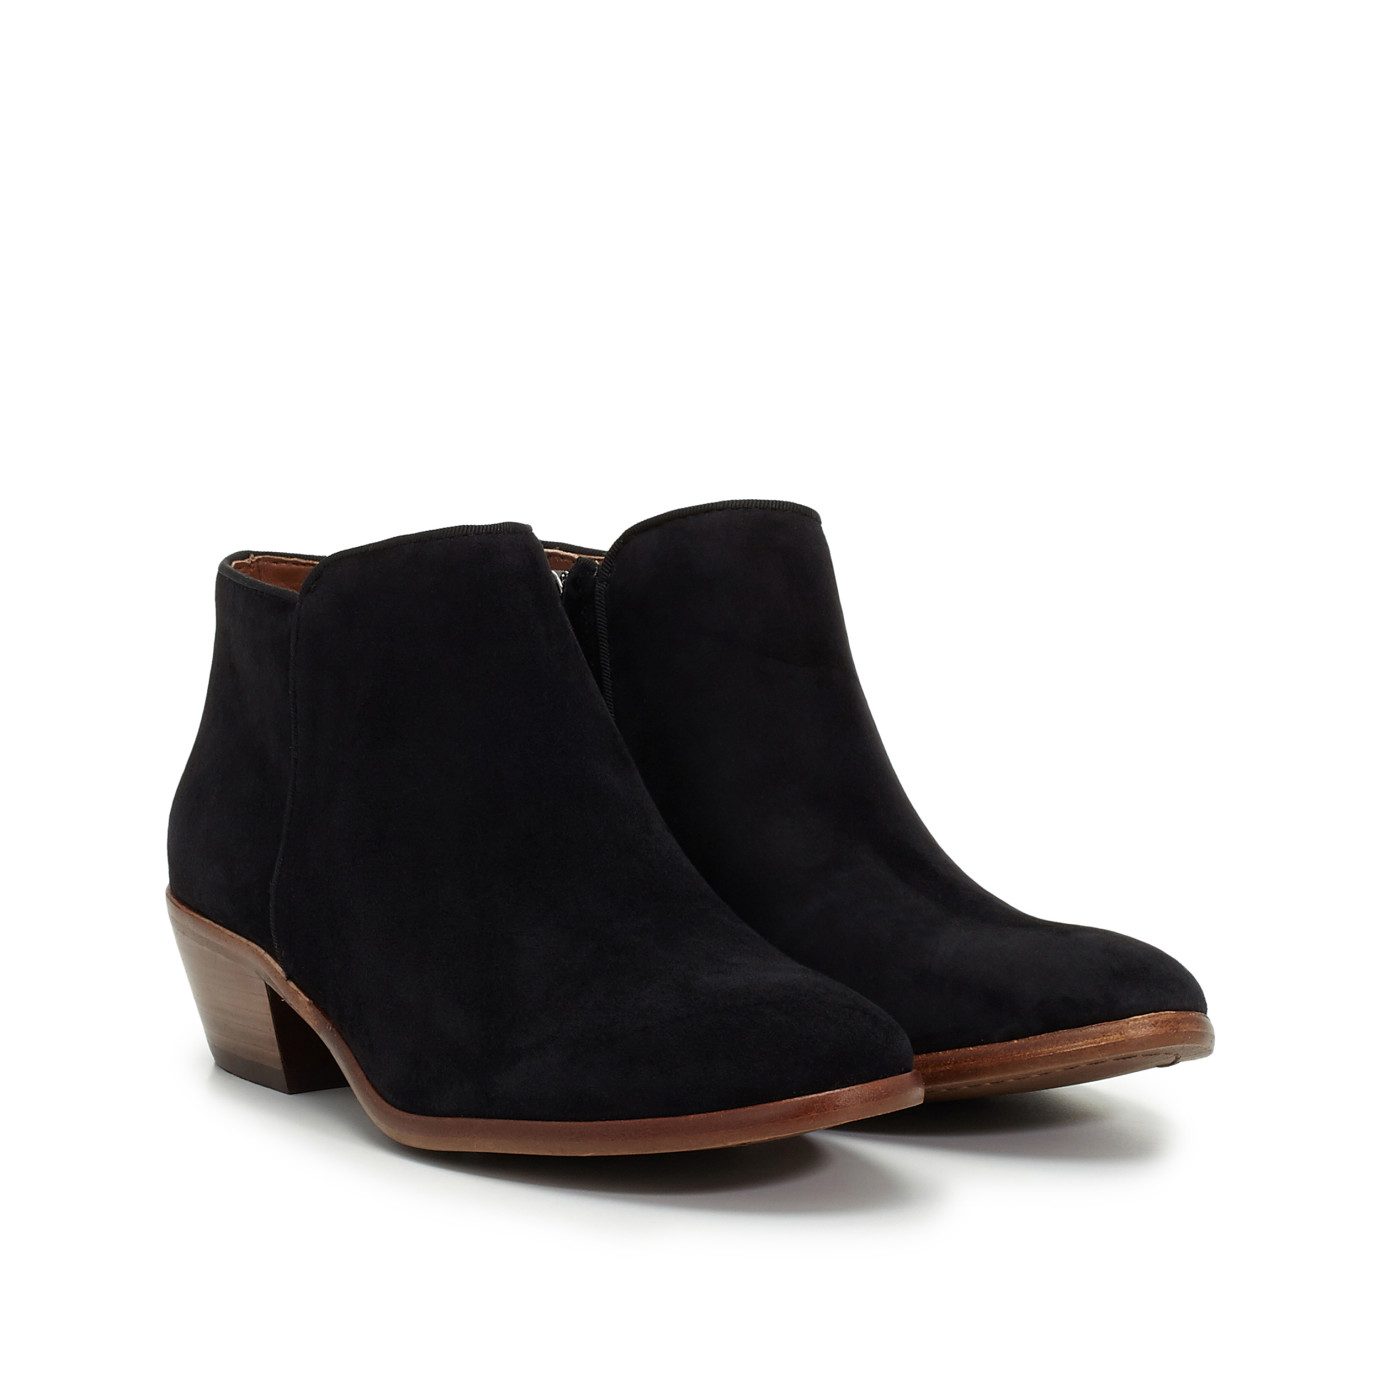 ankle boot petty ankle bootie - boots | samedelman.com PGEAFVT